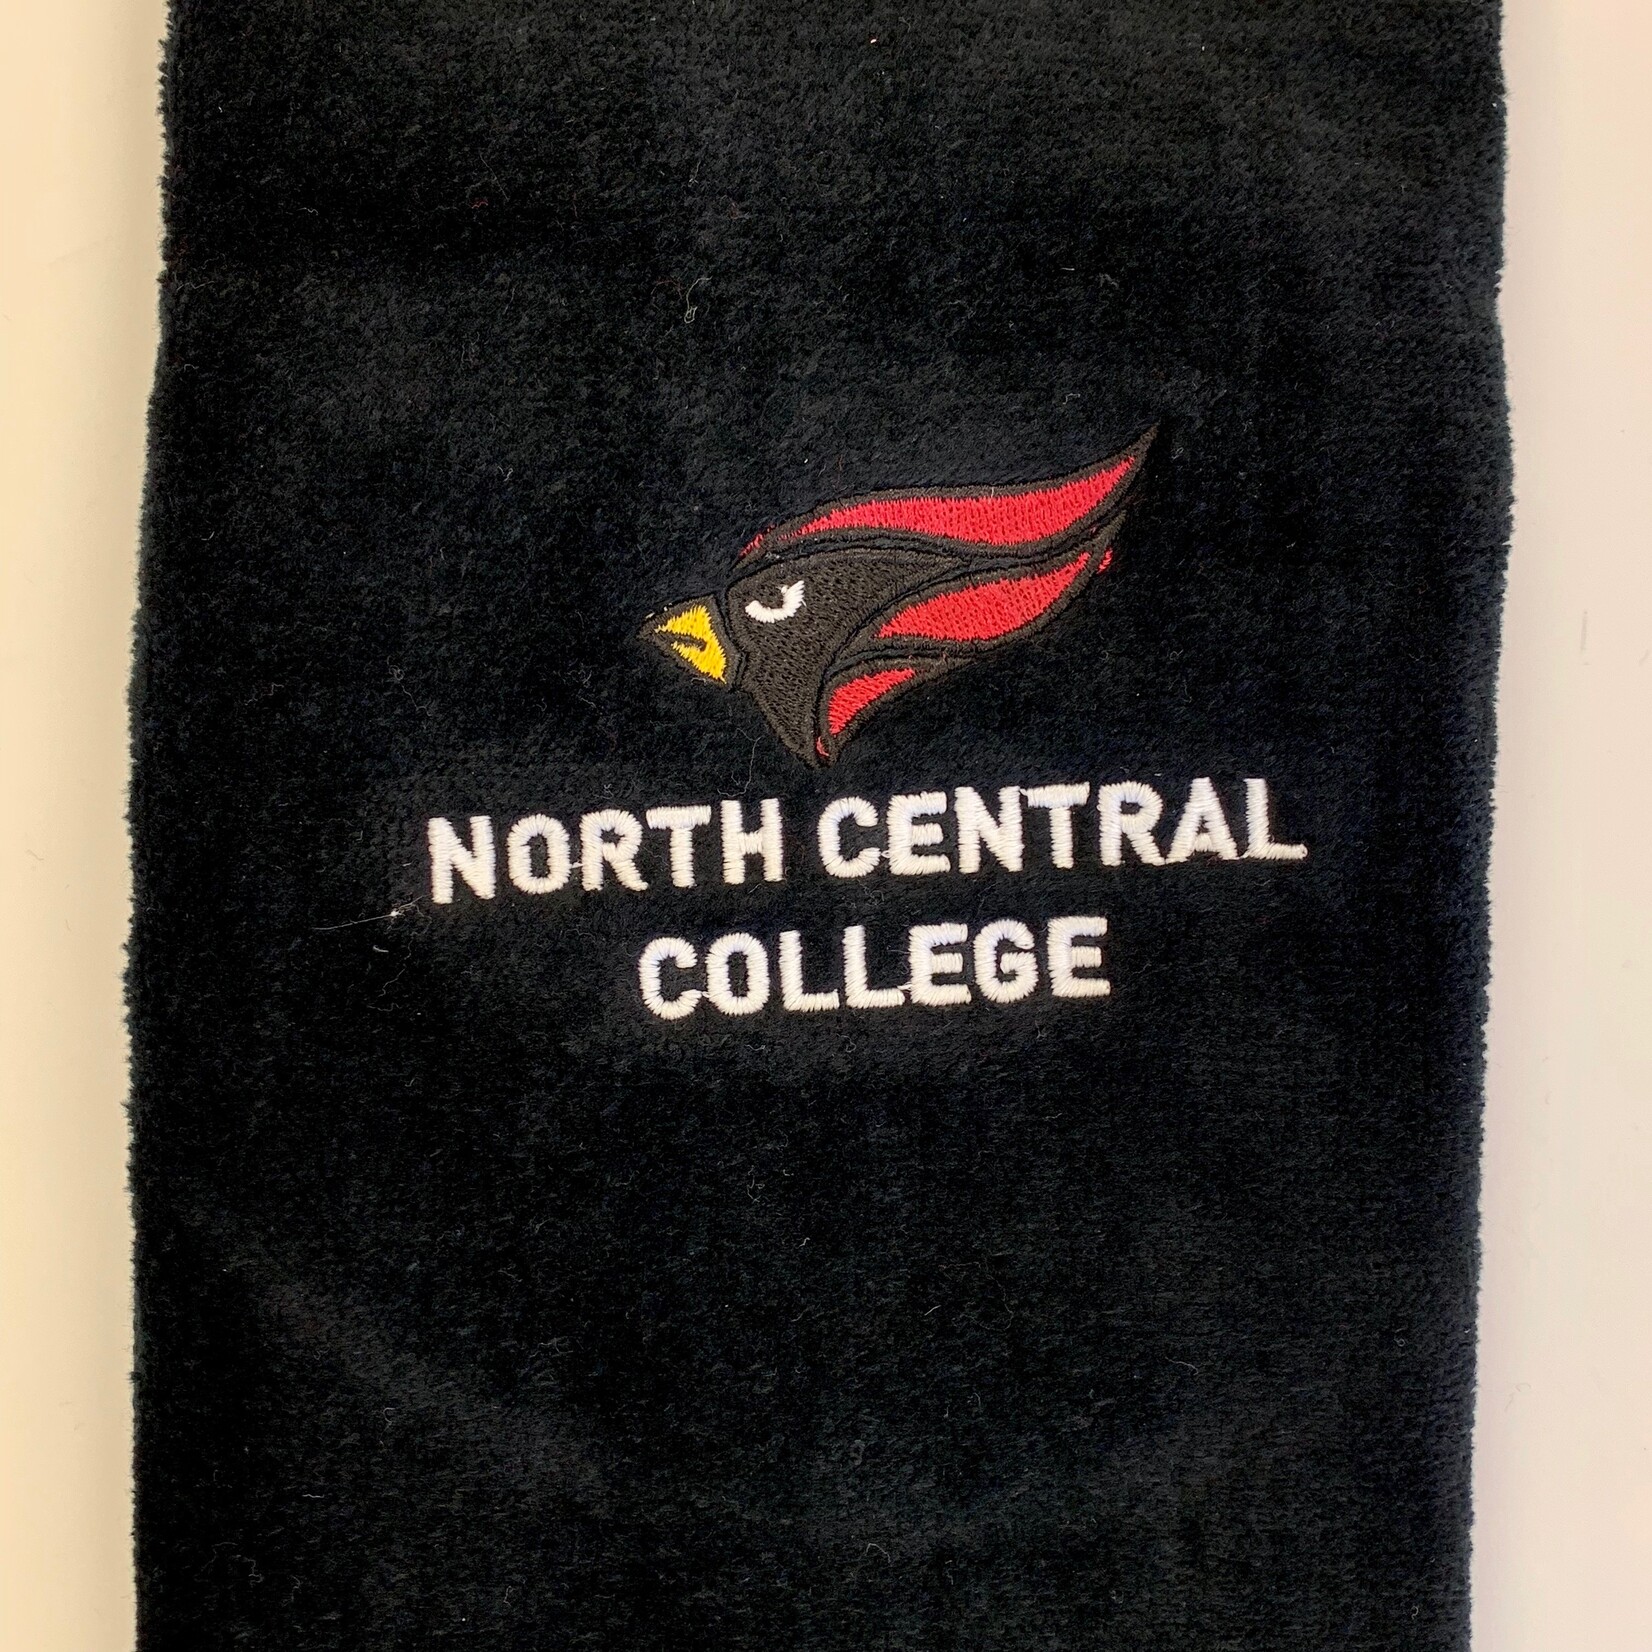 Wincraft North Central College Golf Towel by Wincraft